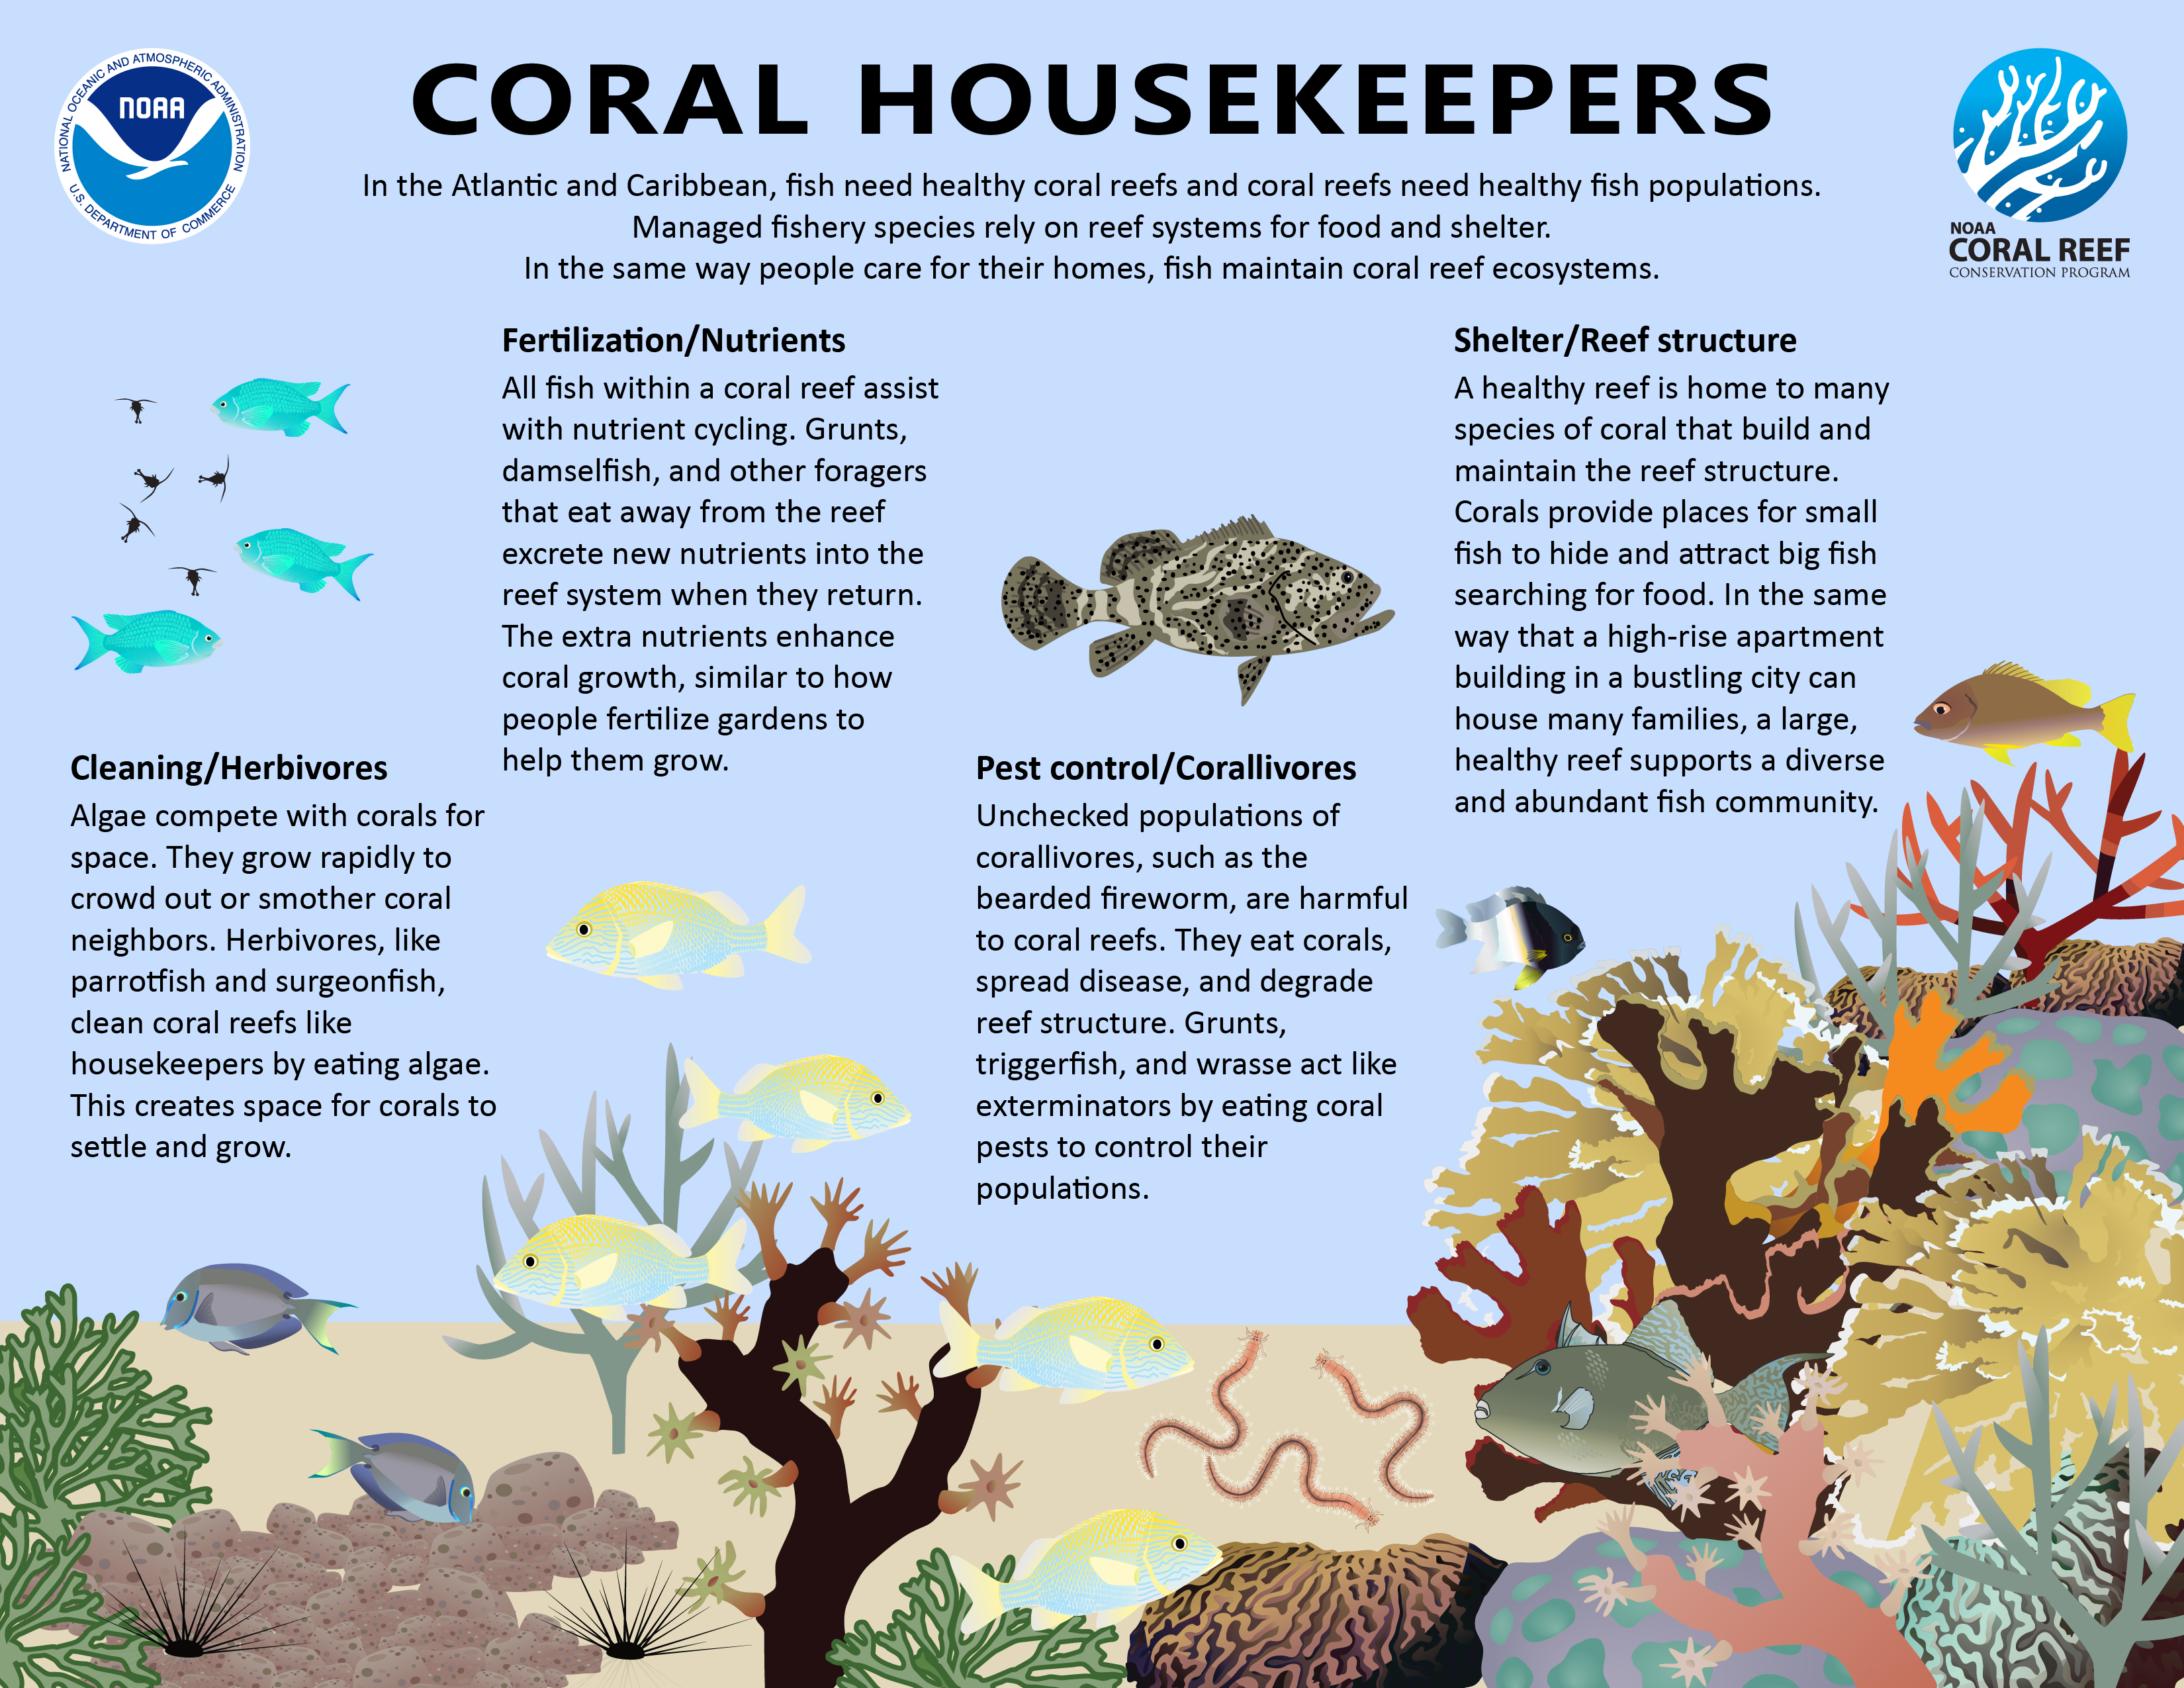 This infographic describes how fish affect coral reef ecosystems.